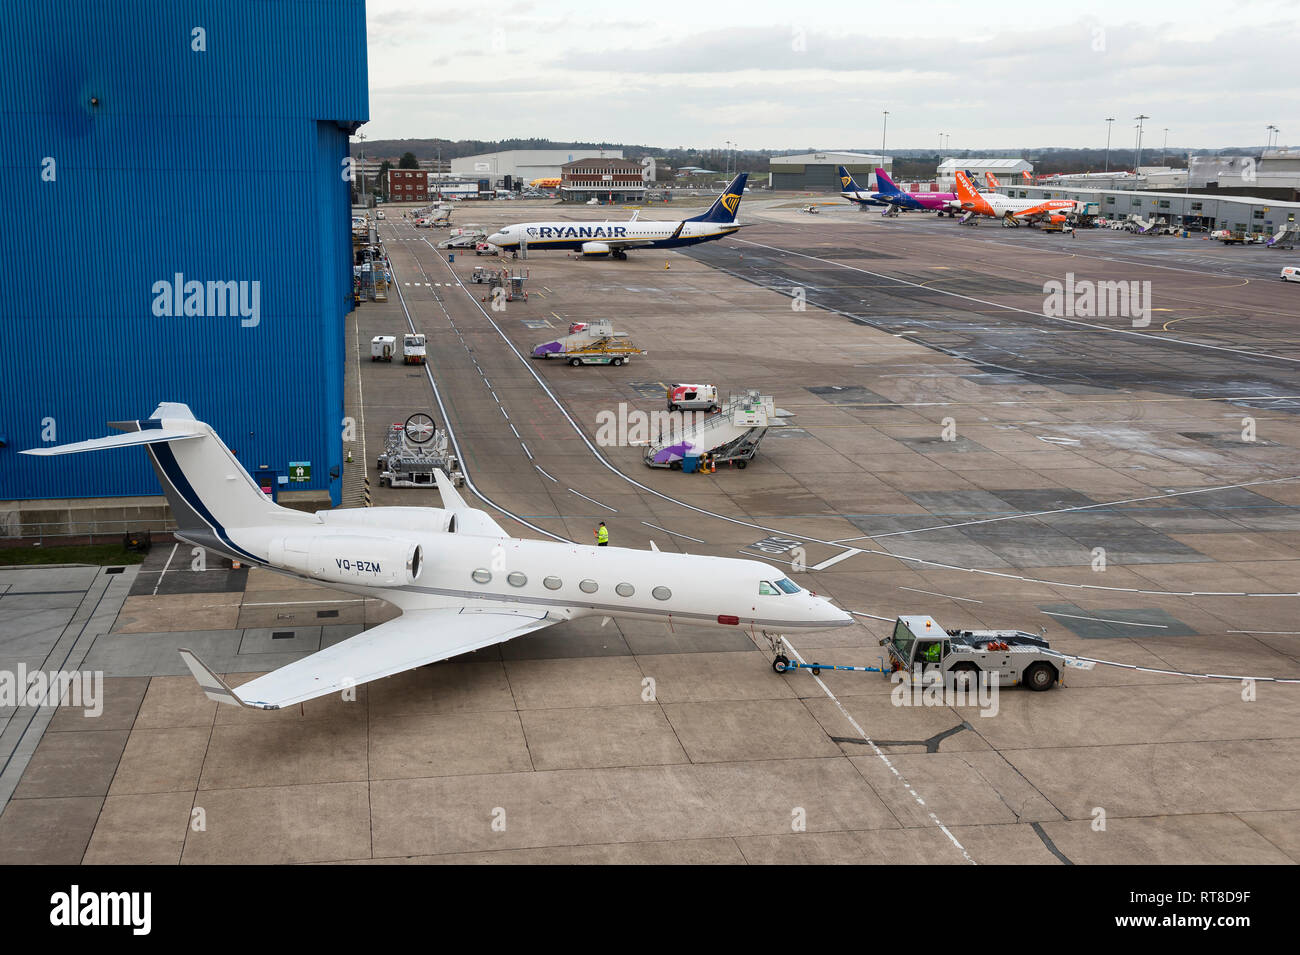 Business jet being manoeuvred by a tug at Luton airport, England. Stock Photo